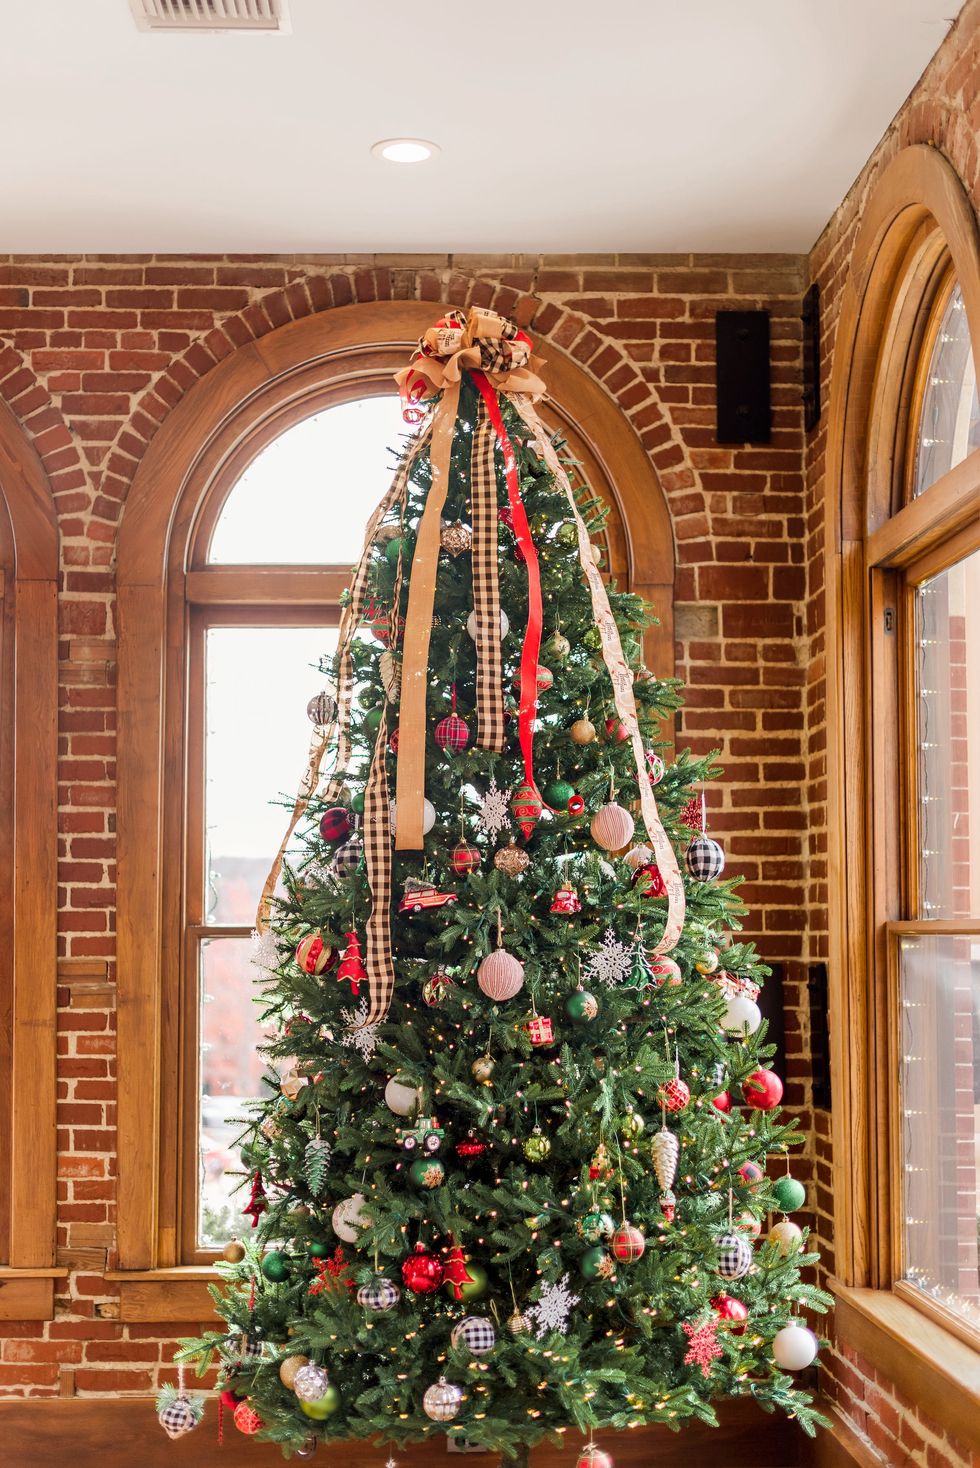 Here's when to take down your Christmas tree, according to